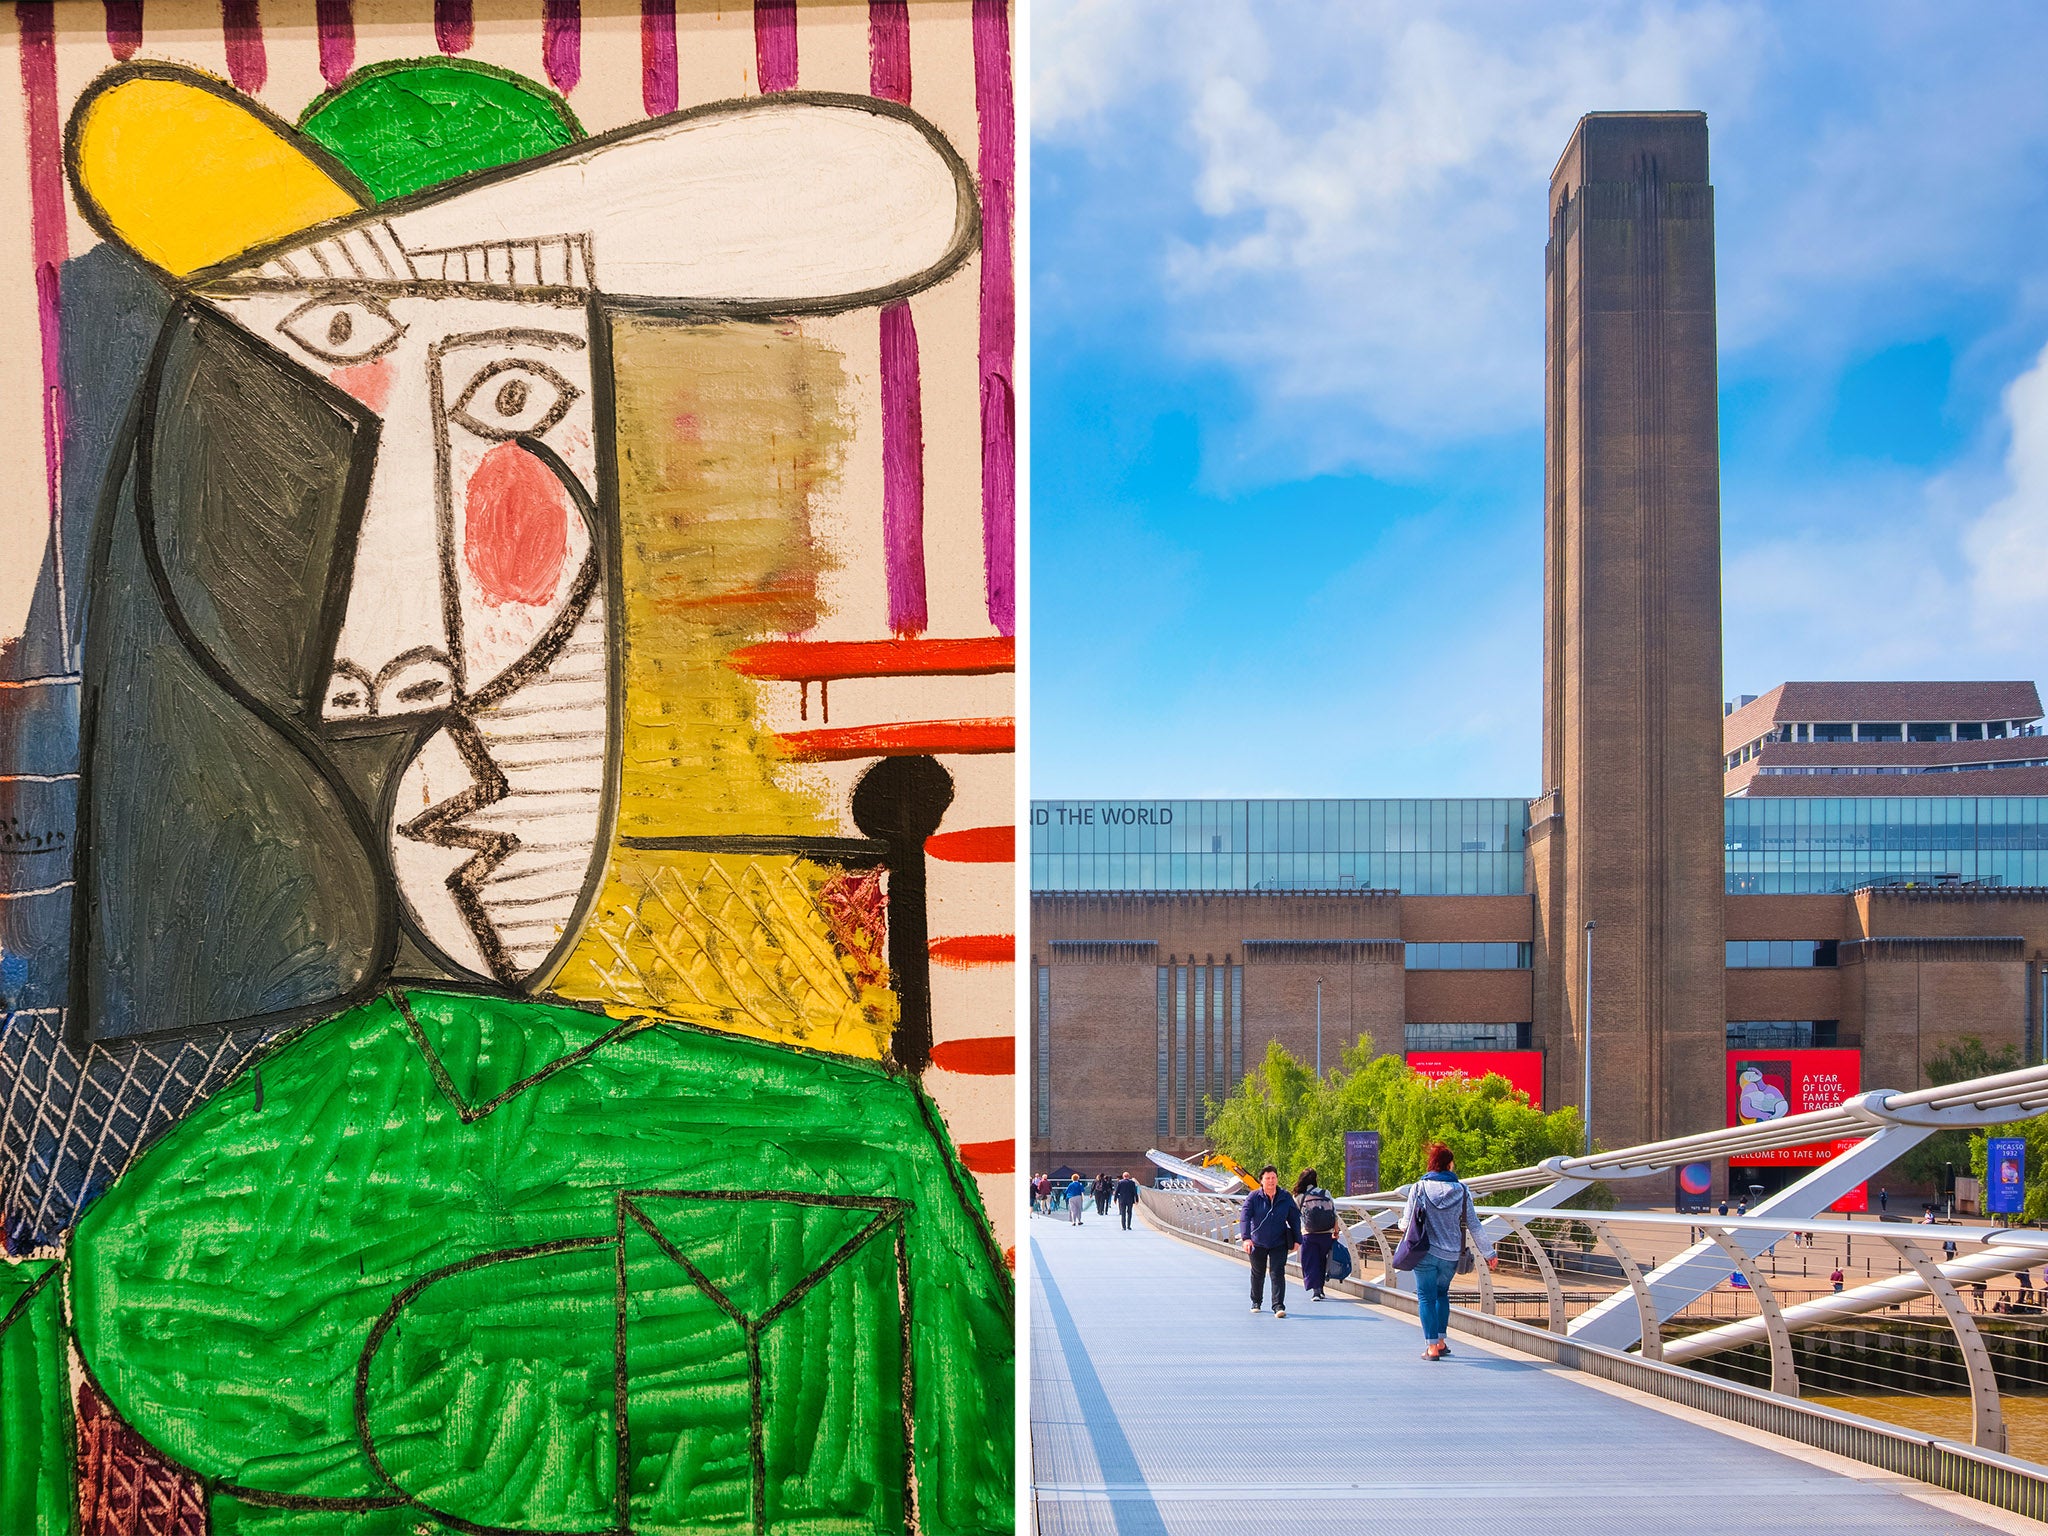 The Tate Modern gallery in London